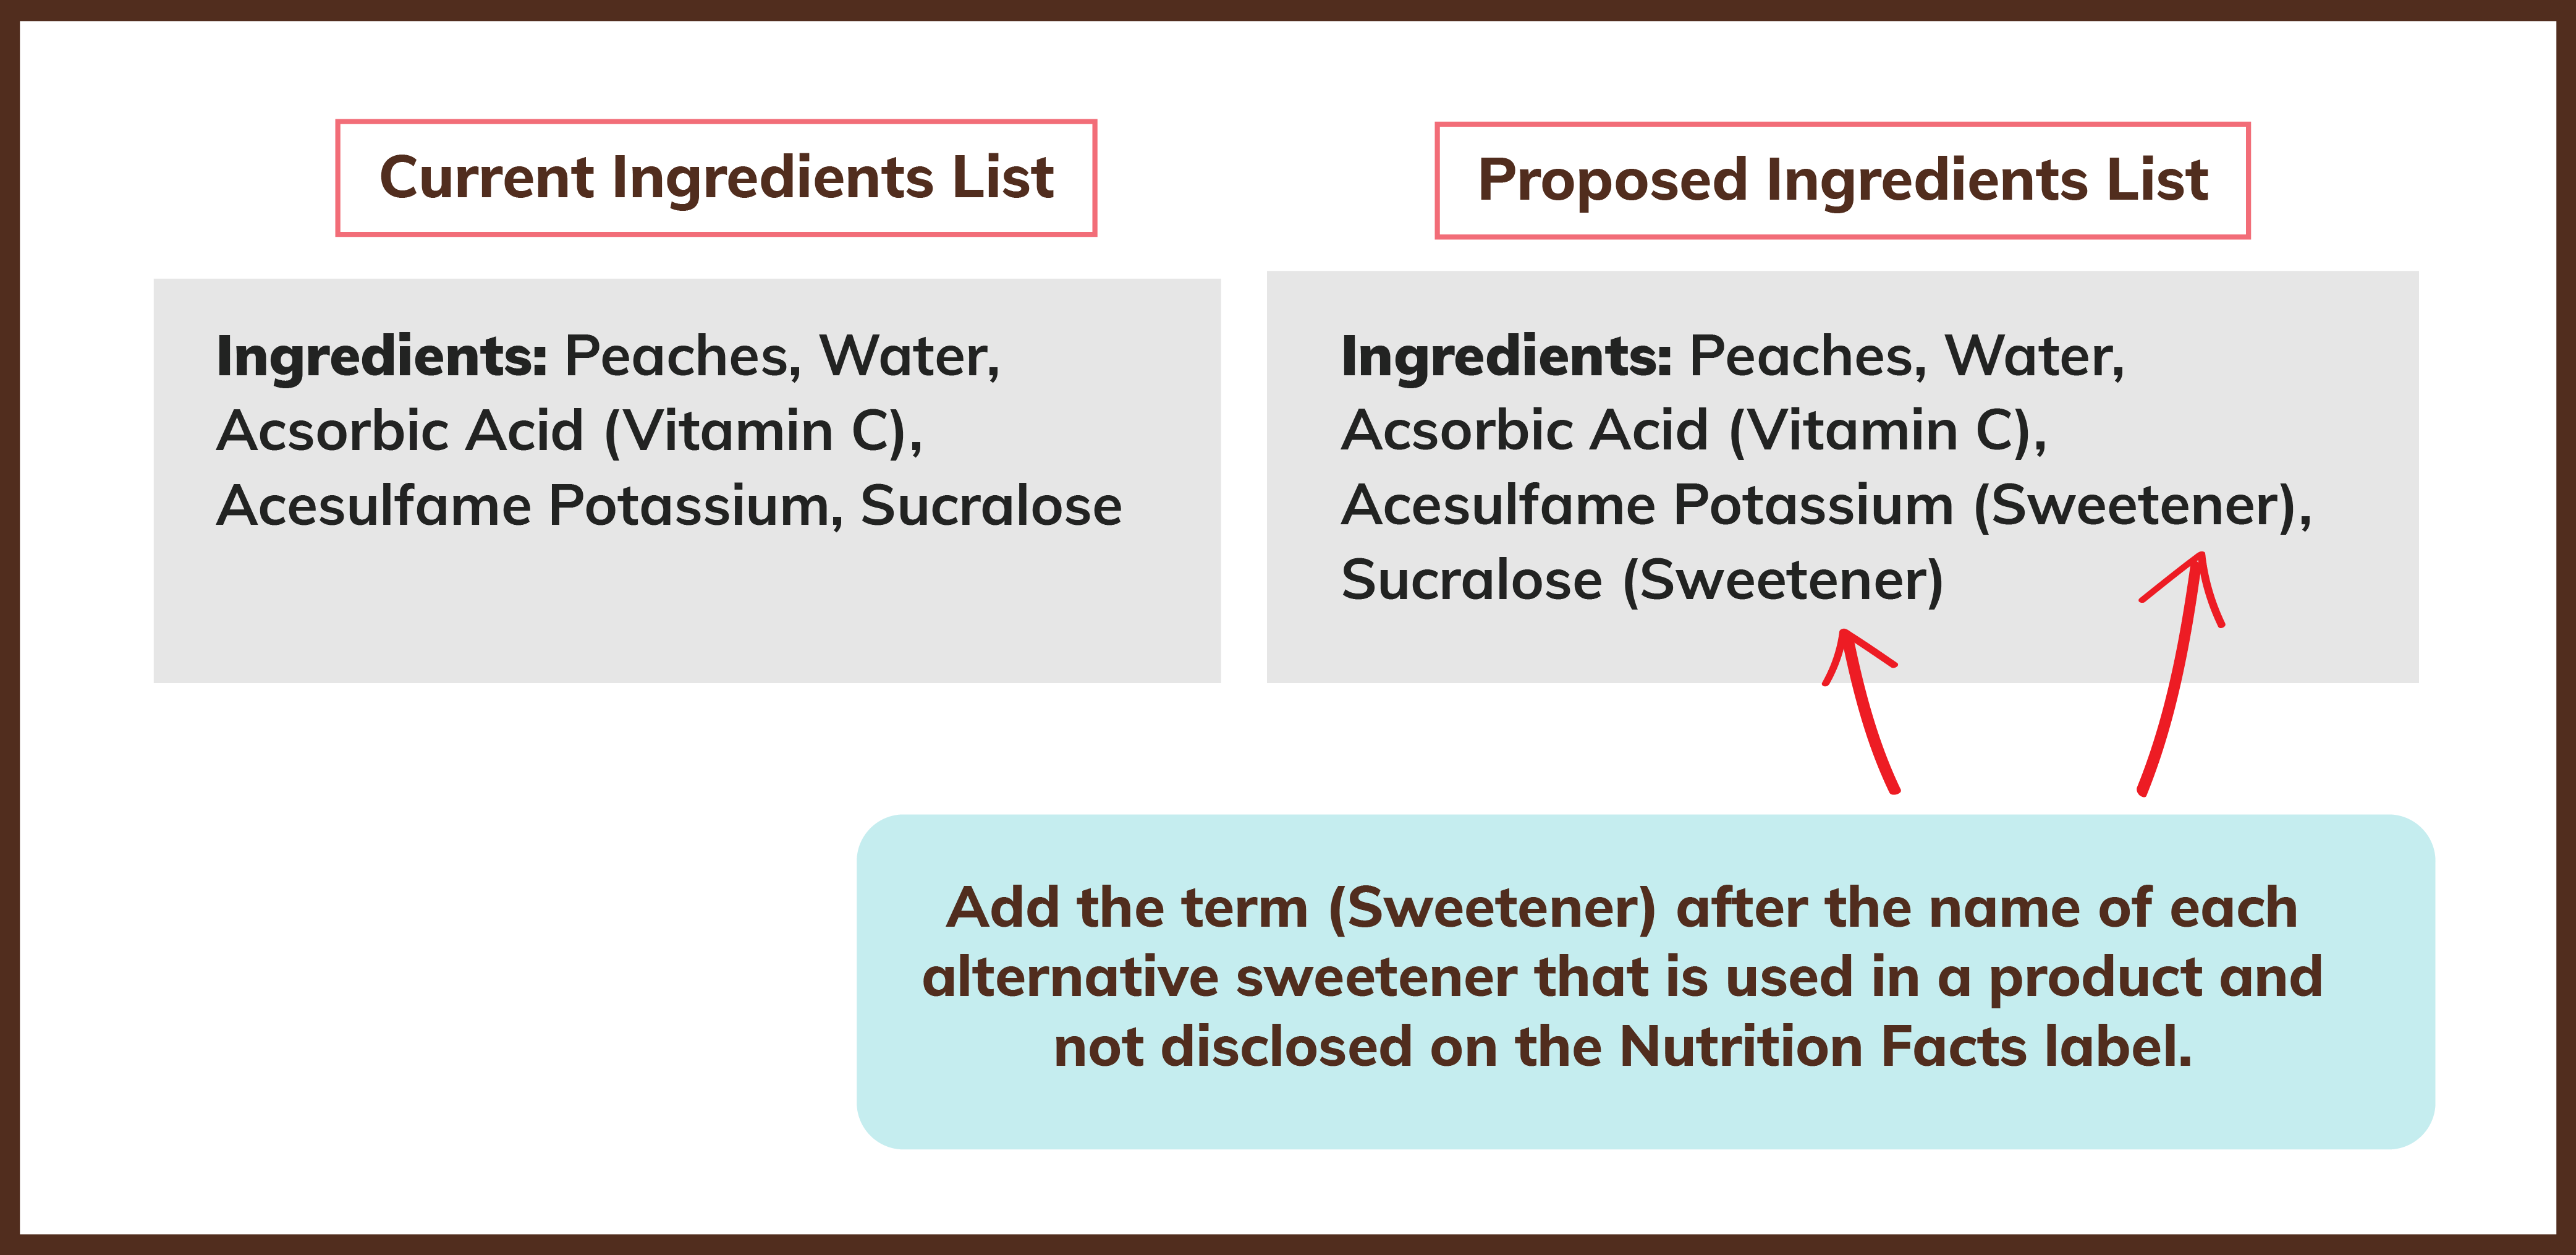 Product Examples_Current-Proposed Ingredient Lists